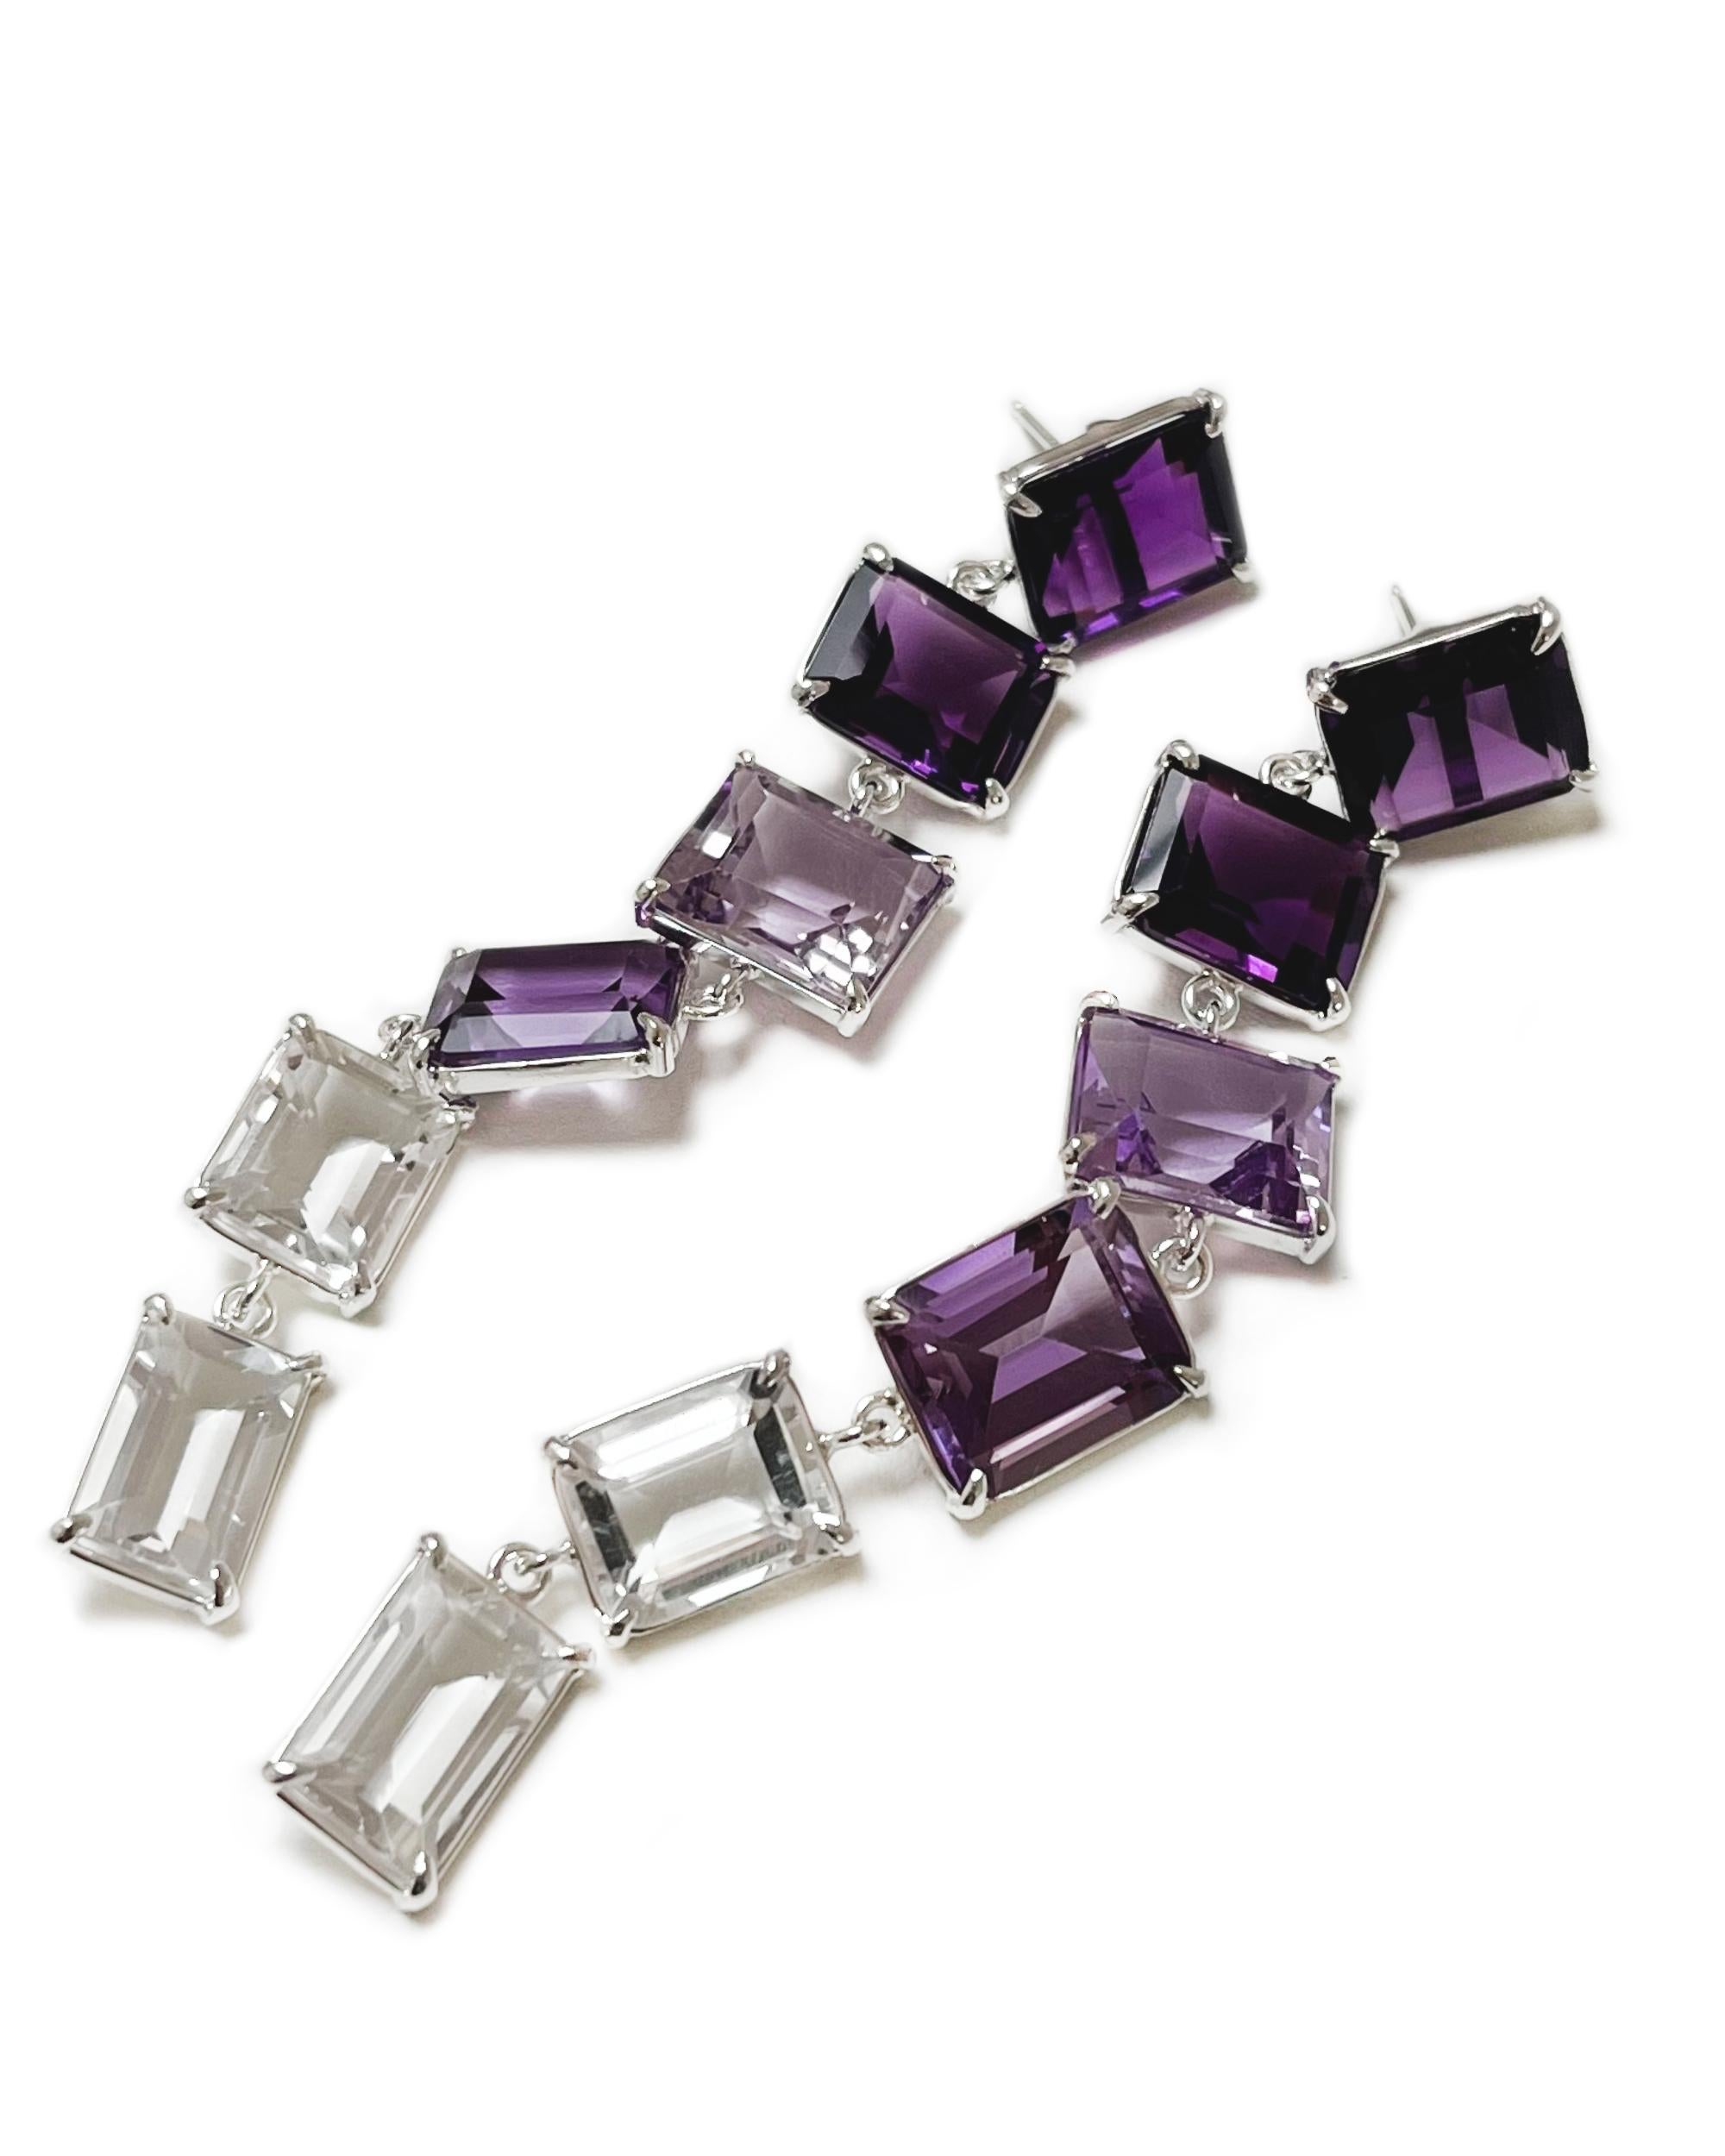 Intention: Ombre away

Design: The Amy earrings are a sweet violet cloud of dangling amethyst and white topaz set both vertically and horizontally. Between the movement of each gemstone, and the gradient colors, you too will feel like you could